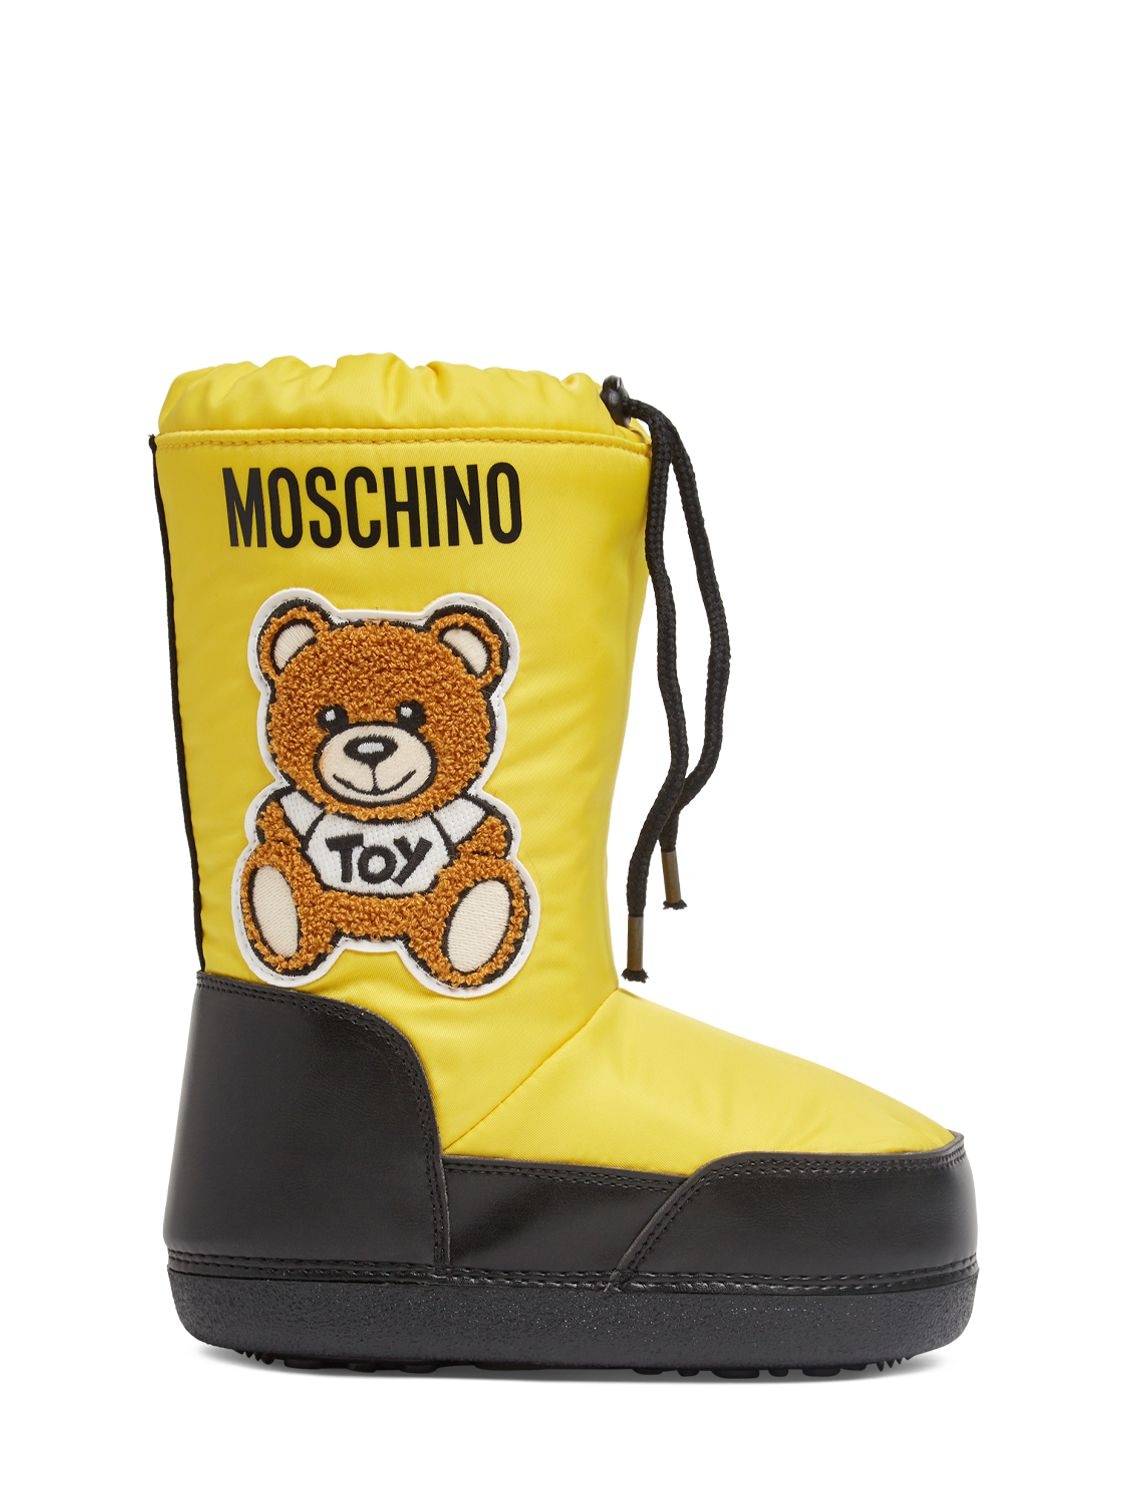 Moschino Kids' Snow Boots W/logo In Yellow